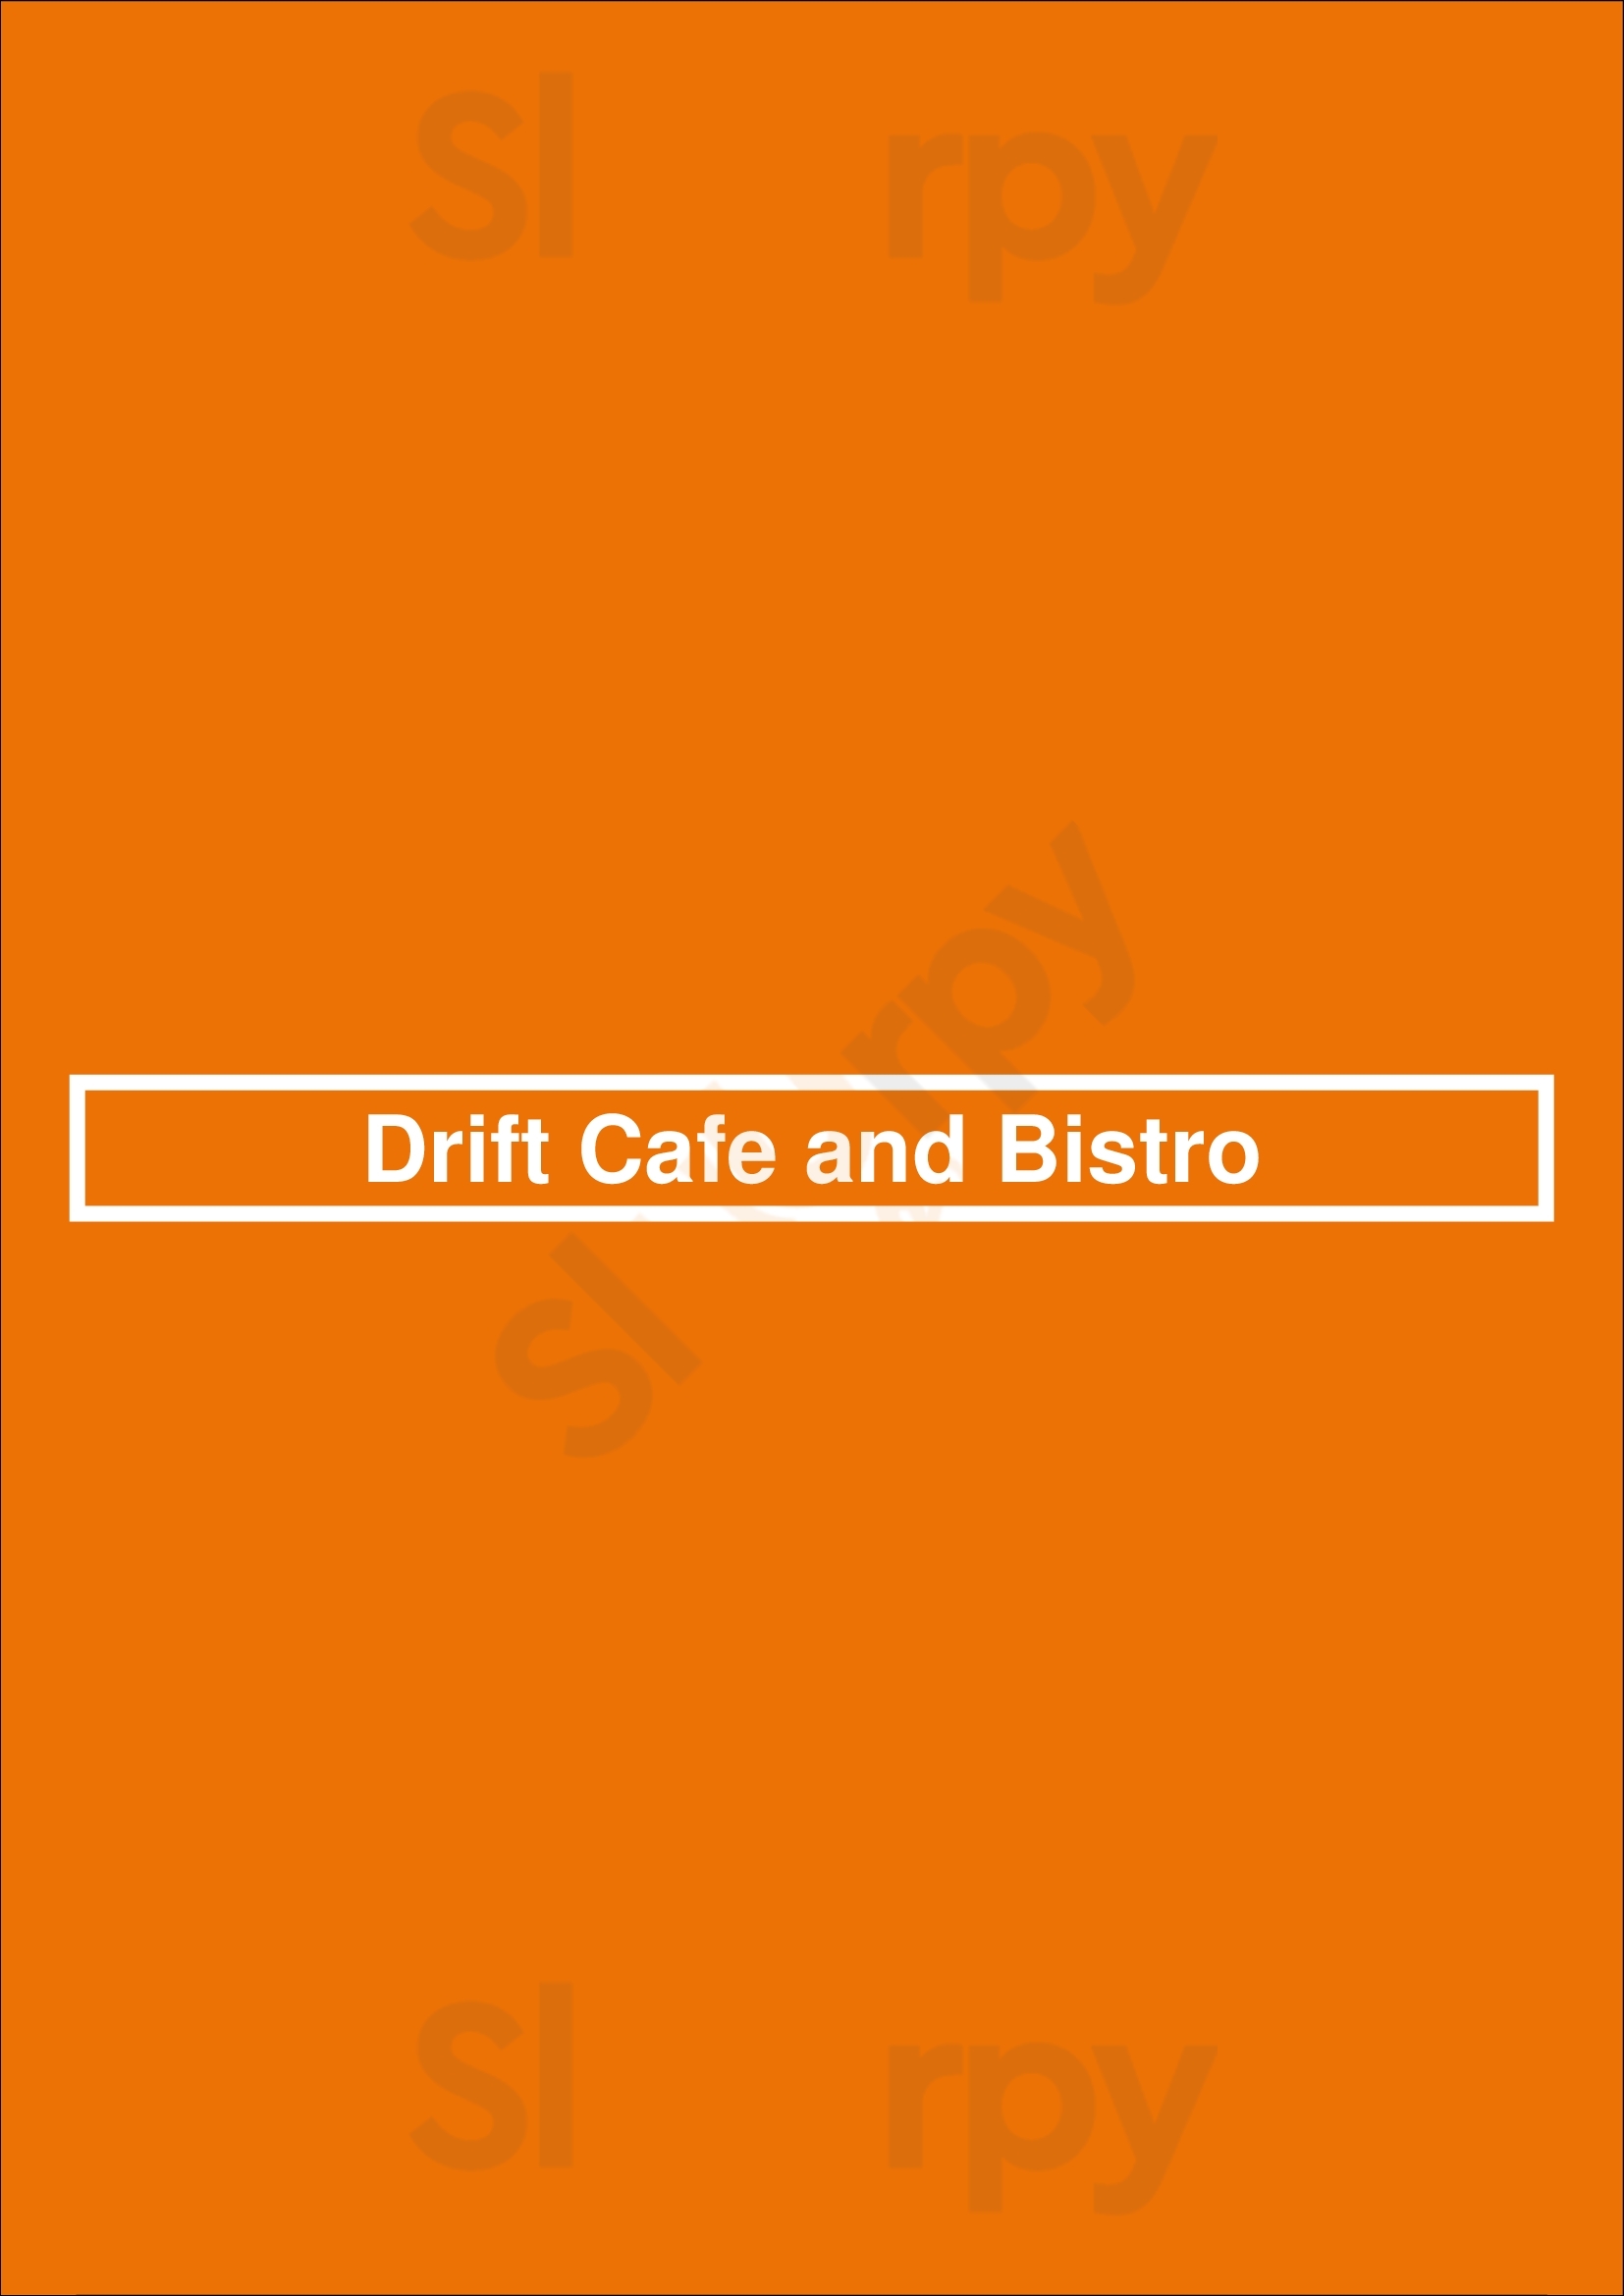 Drift Cafe And Bistro Gibsons Menu - 1